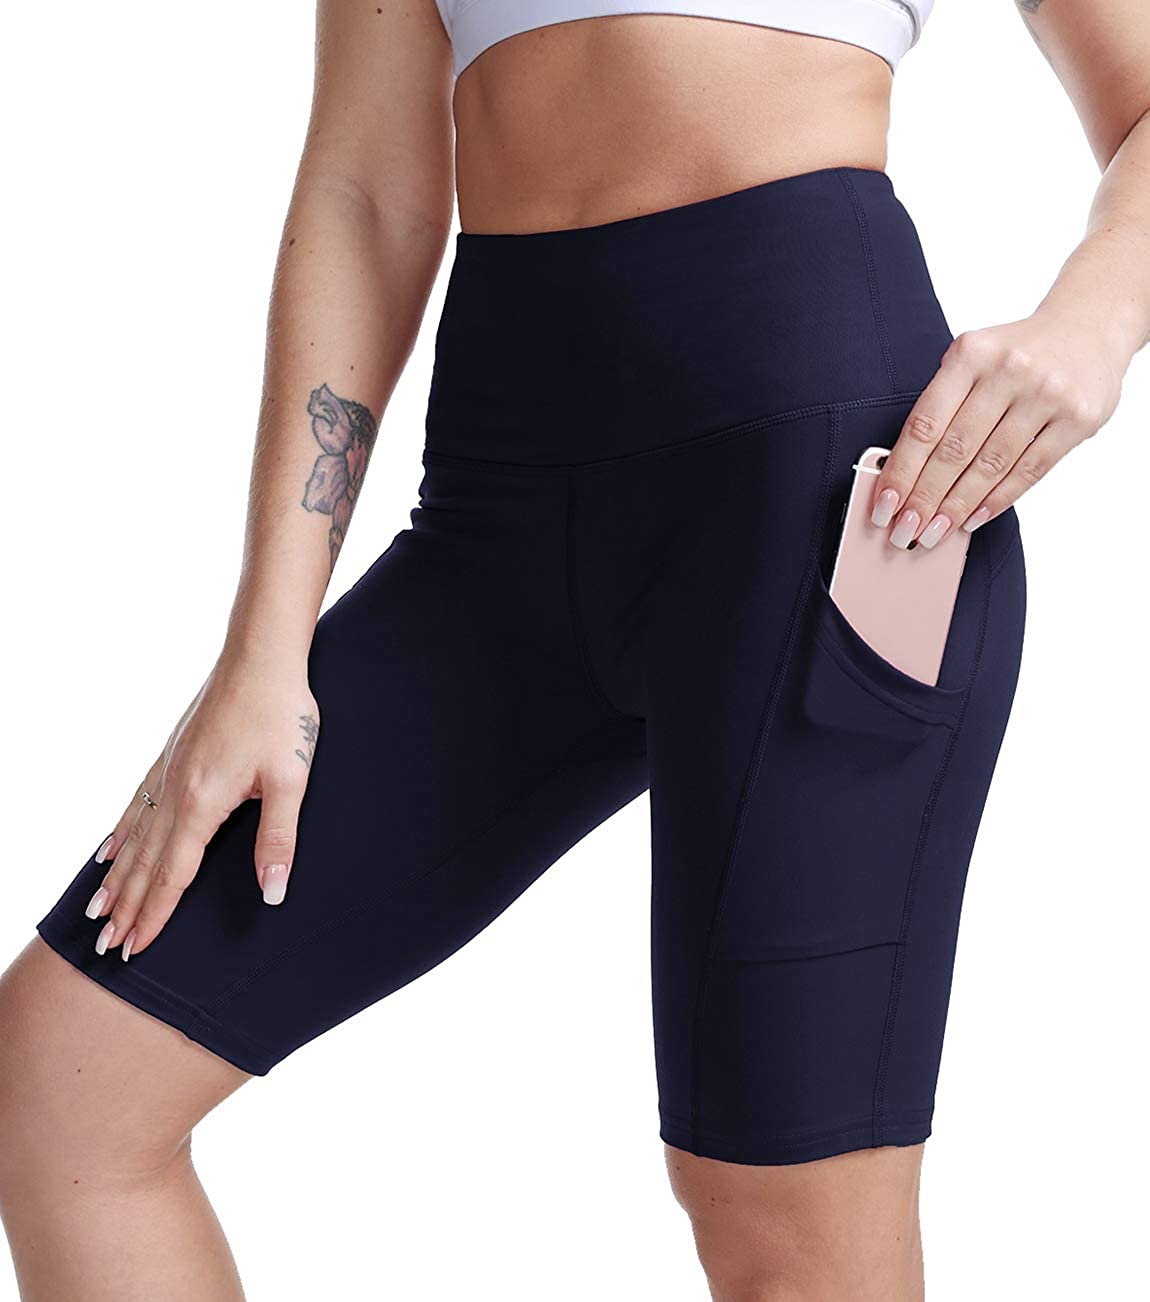 TYUIO High Waisted Yoga Pants for Women Athletic Workout Running Leggings with Pockets